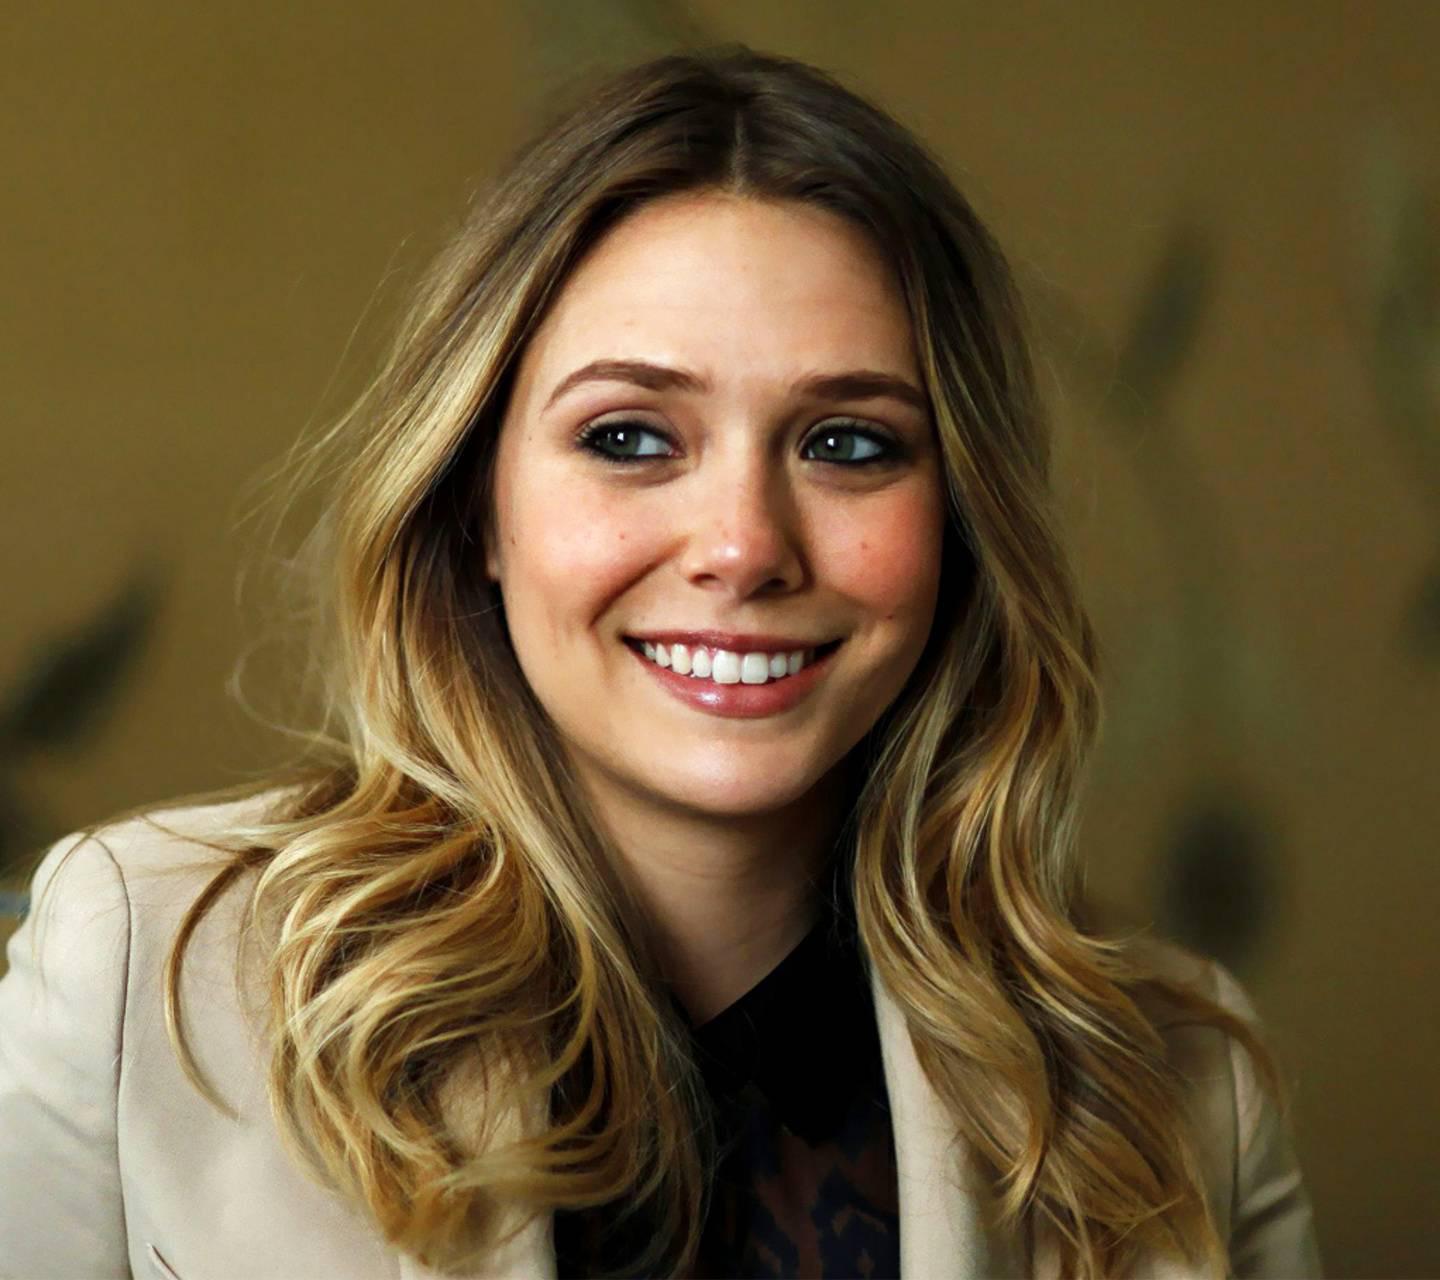 Elizabeth Olsen sure make dicks harder for everyone. All I wanted is to squirt all my cum in her face and pussy